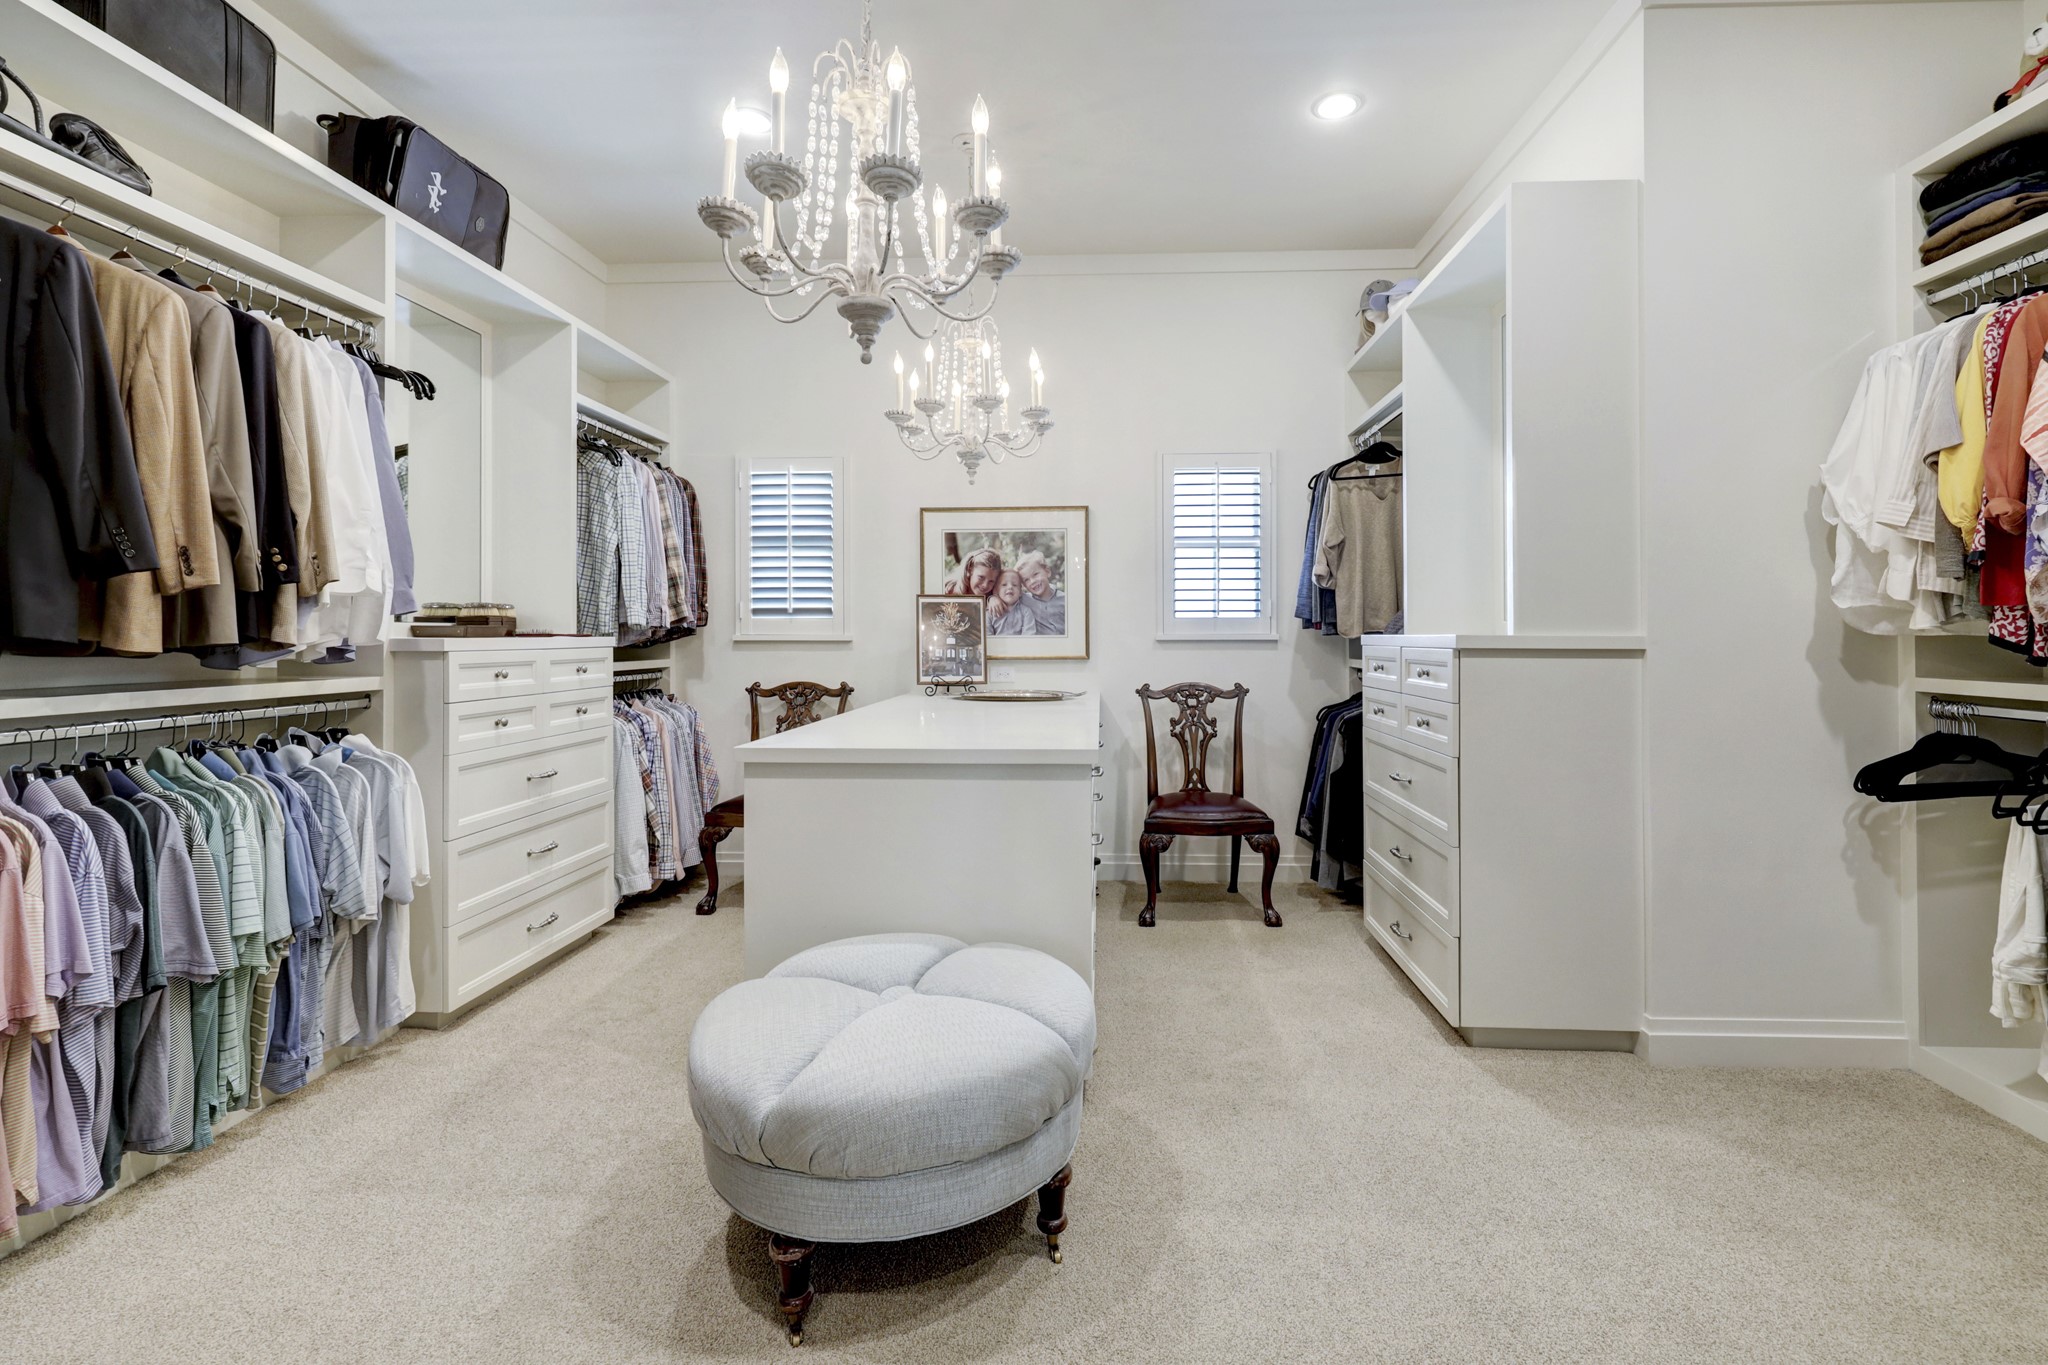 Incredible Primary Closet with built ins and packing station. This home has exceptional storage throughout.